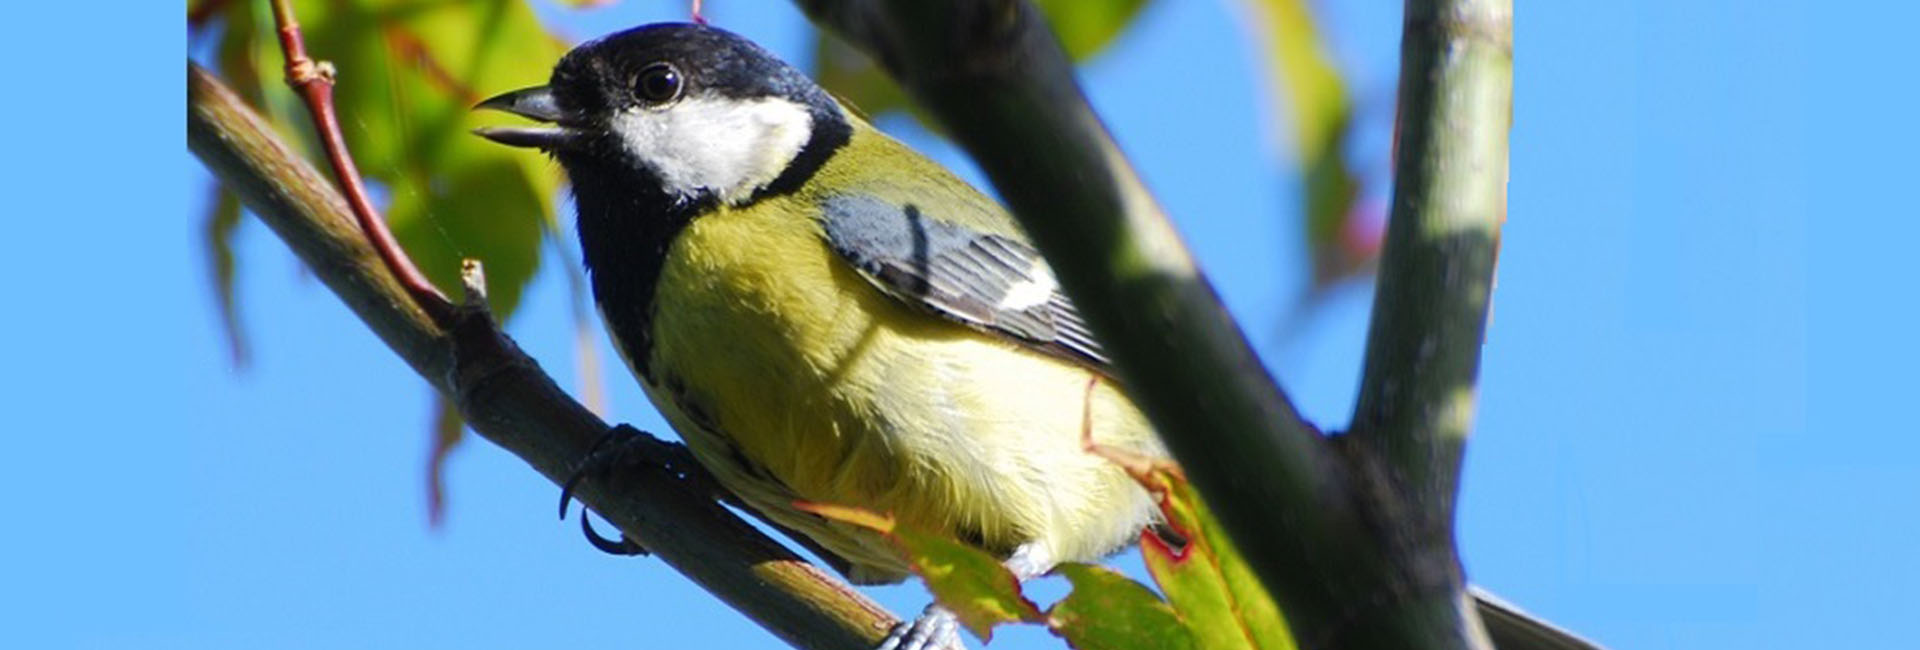 Great tit in a tree against blue sky